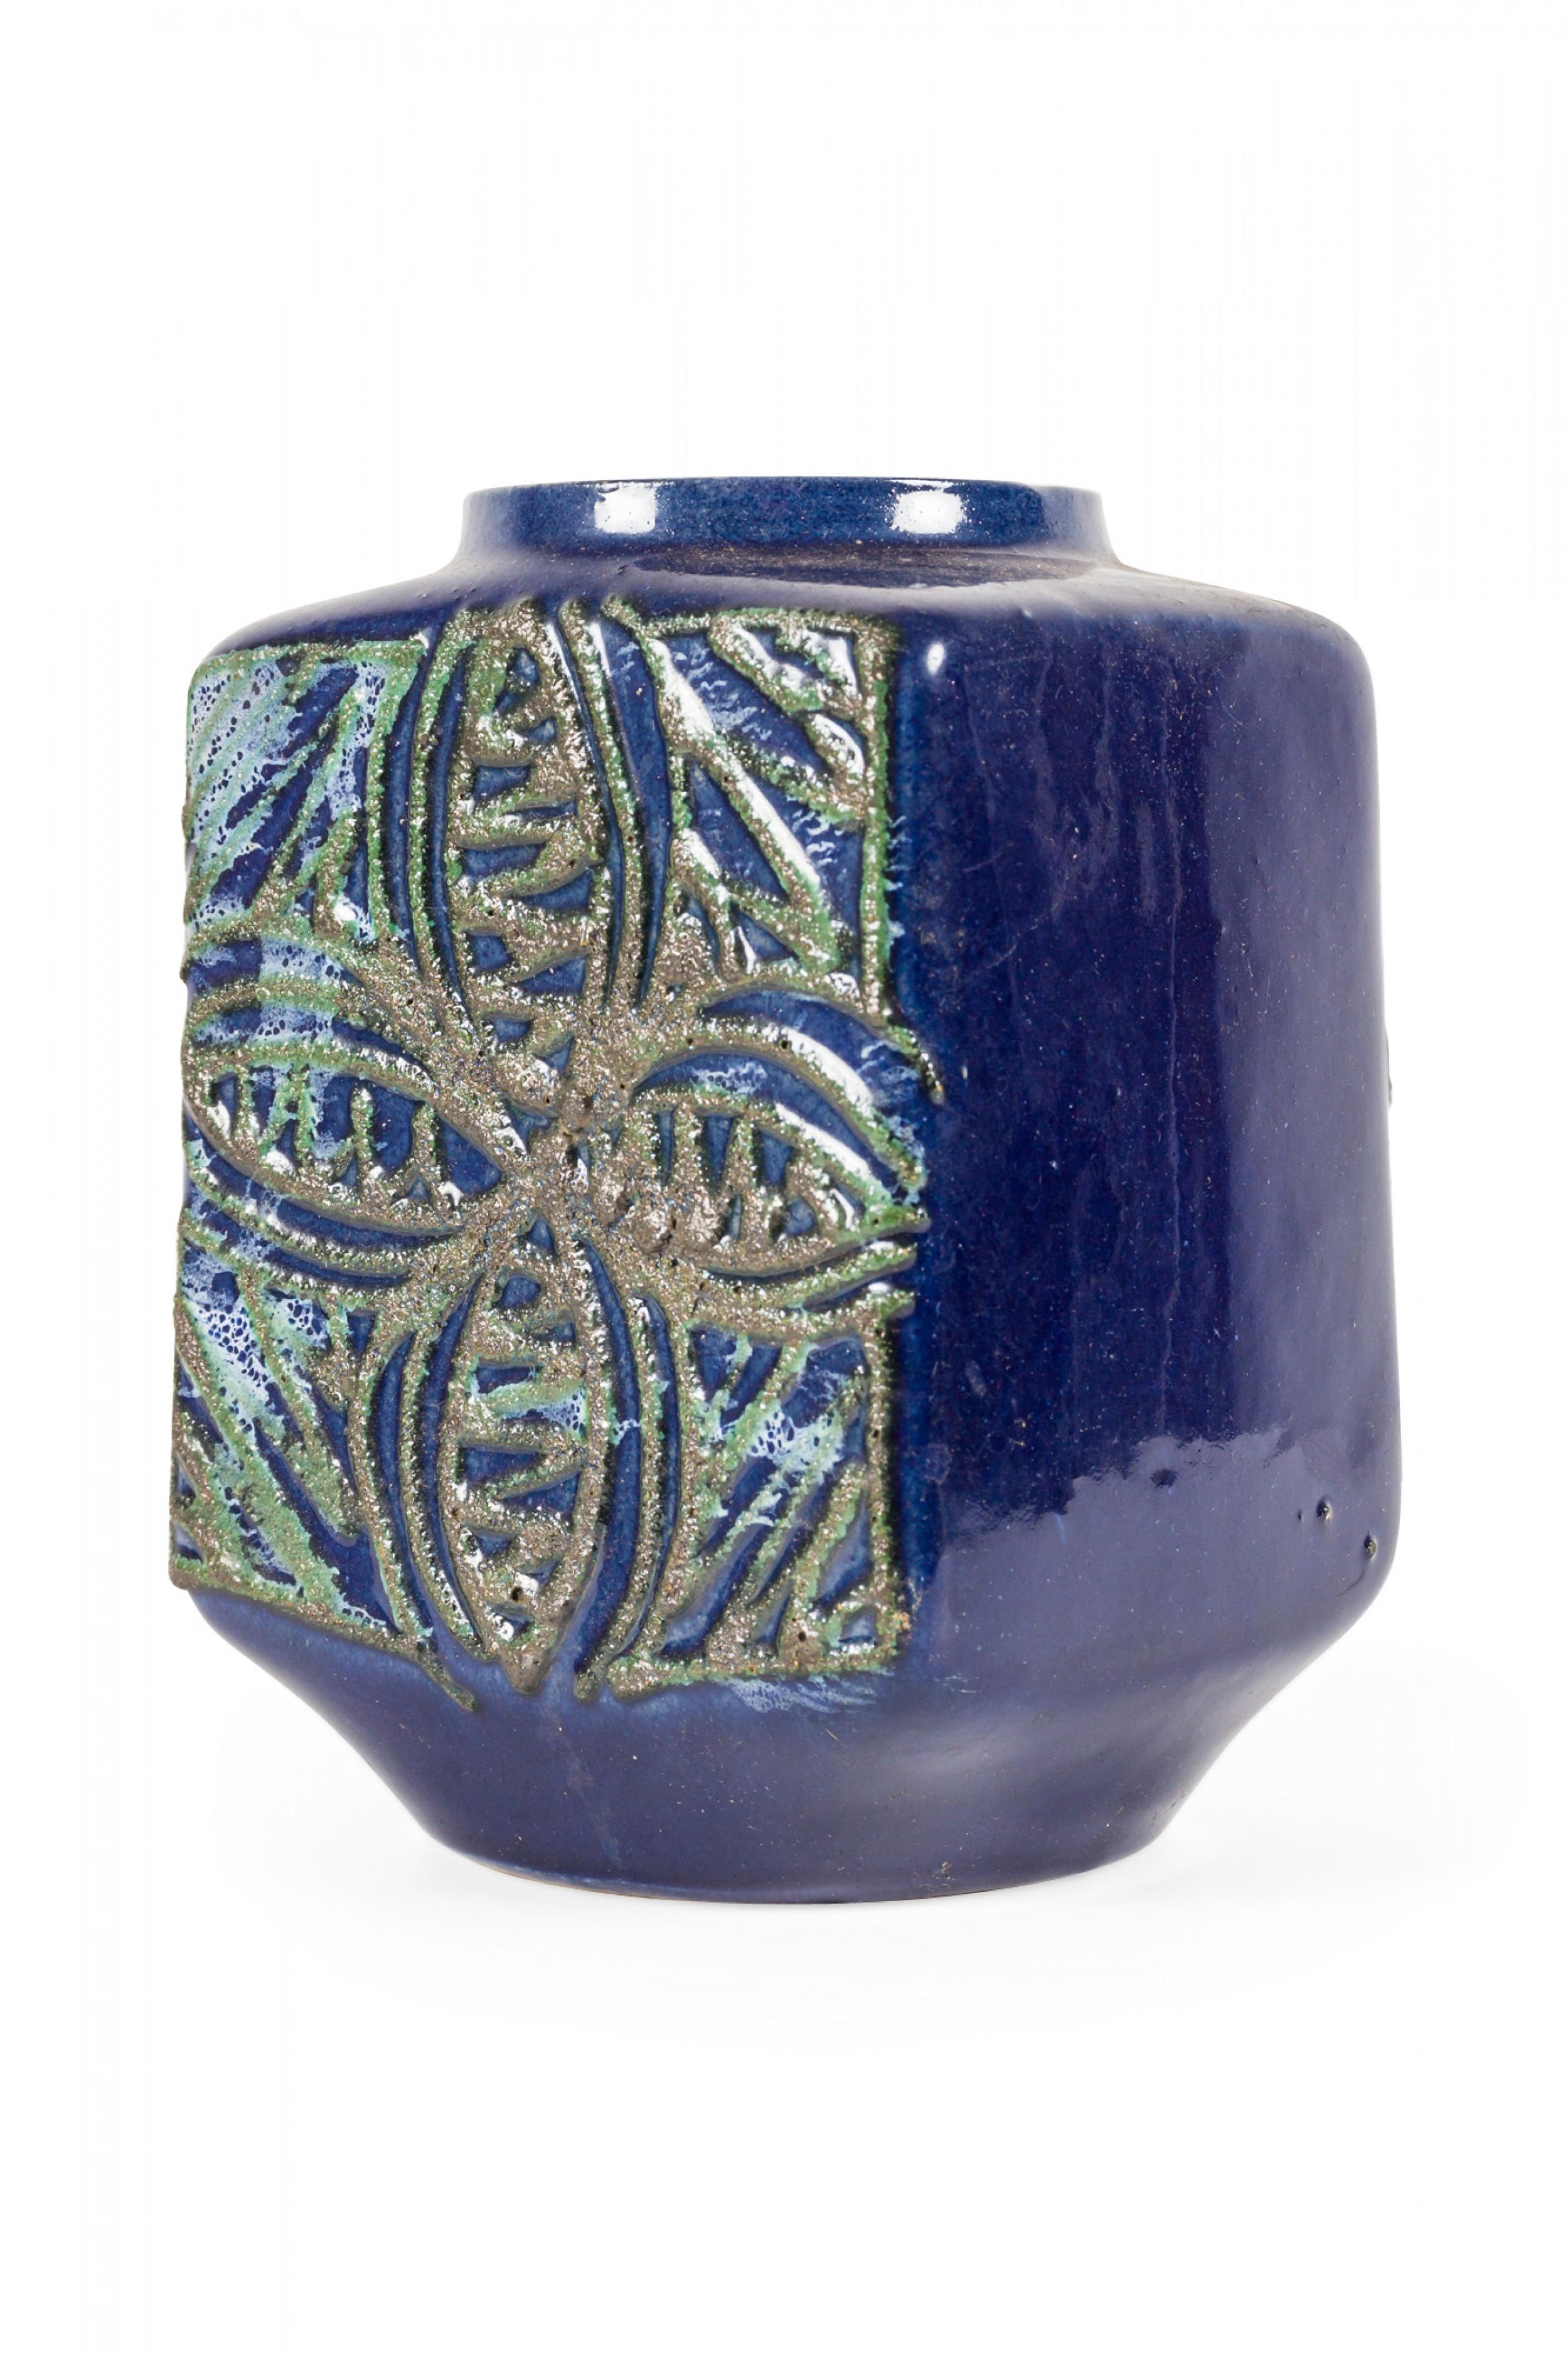 East German mid-century square ceramic vase with a raised gold and green clover and line pattern against a deep blue glazed ground. (stamped on bottom, STREHLA MADE IN GDR 7277).